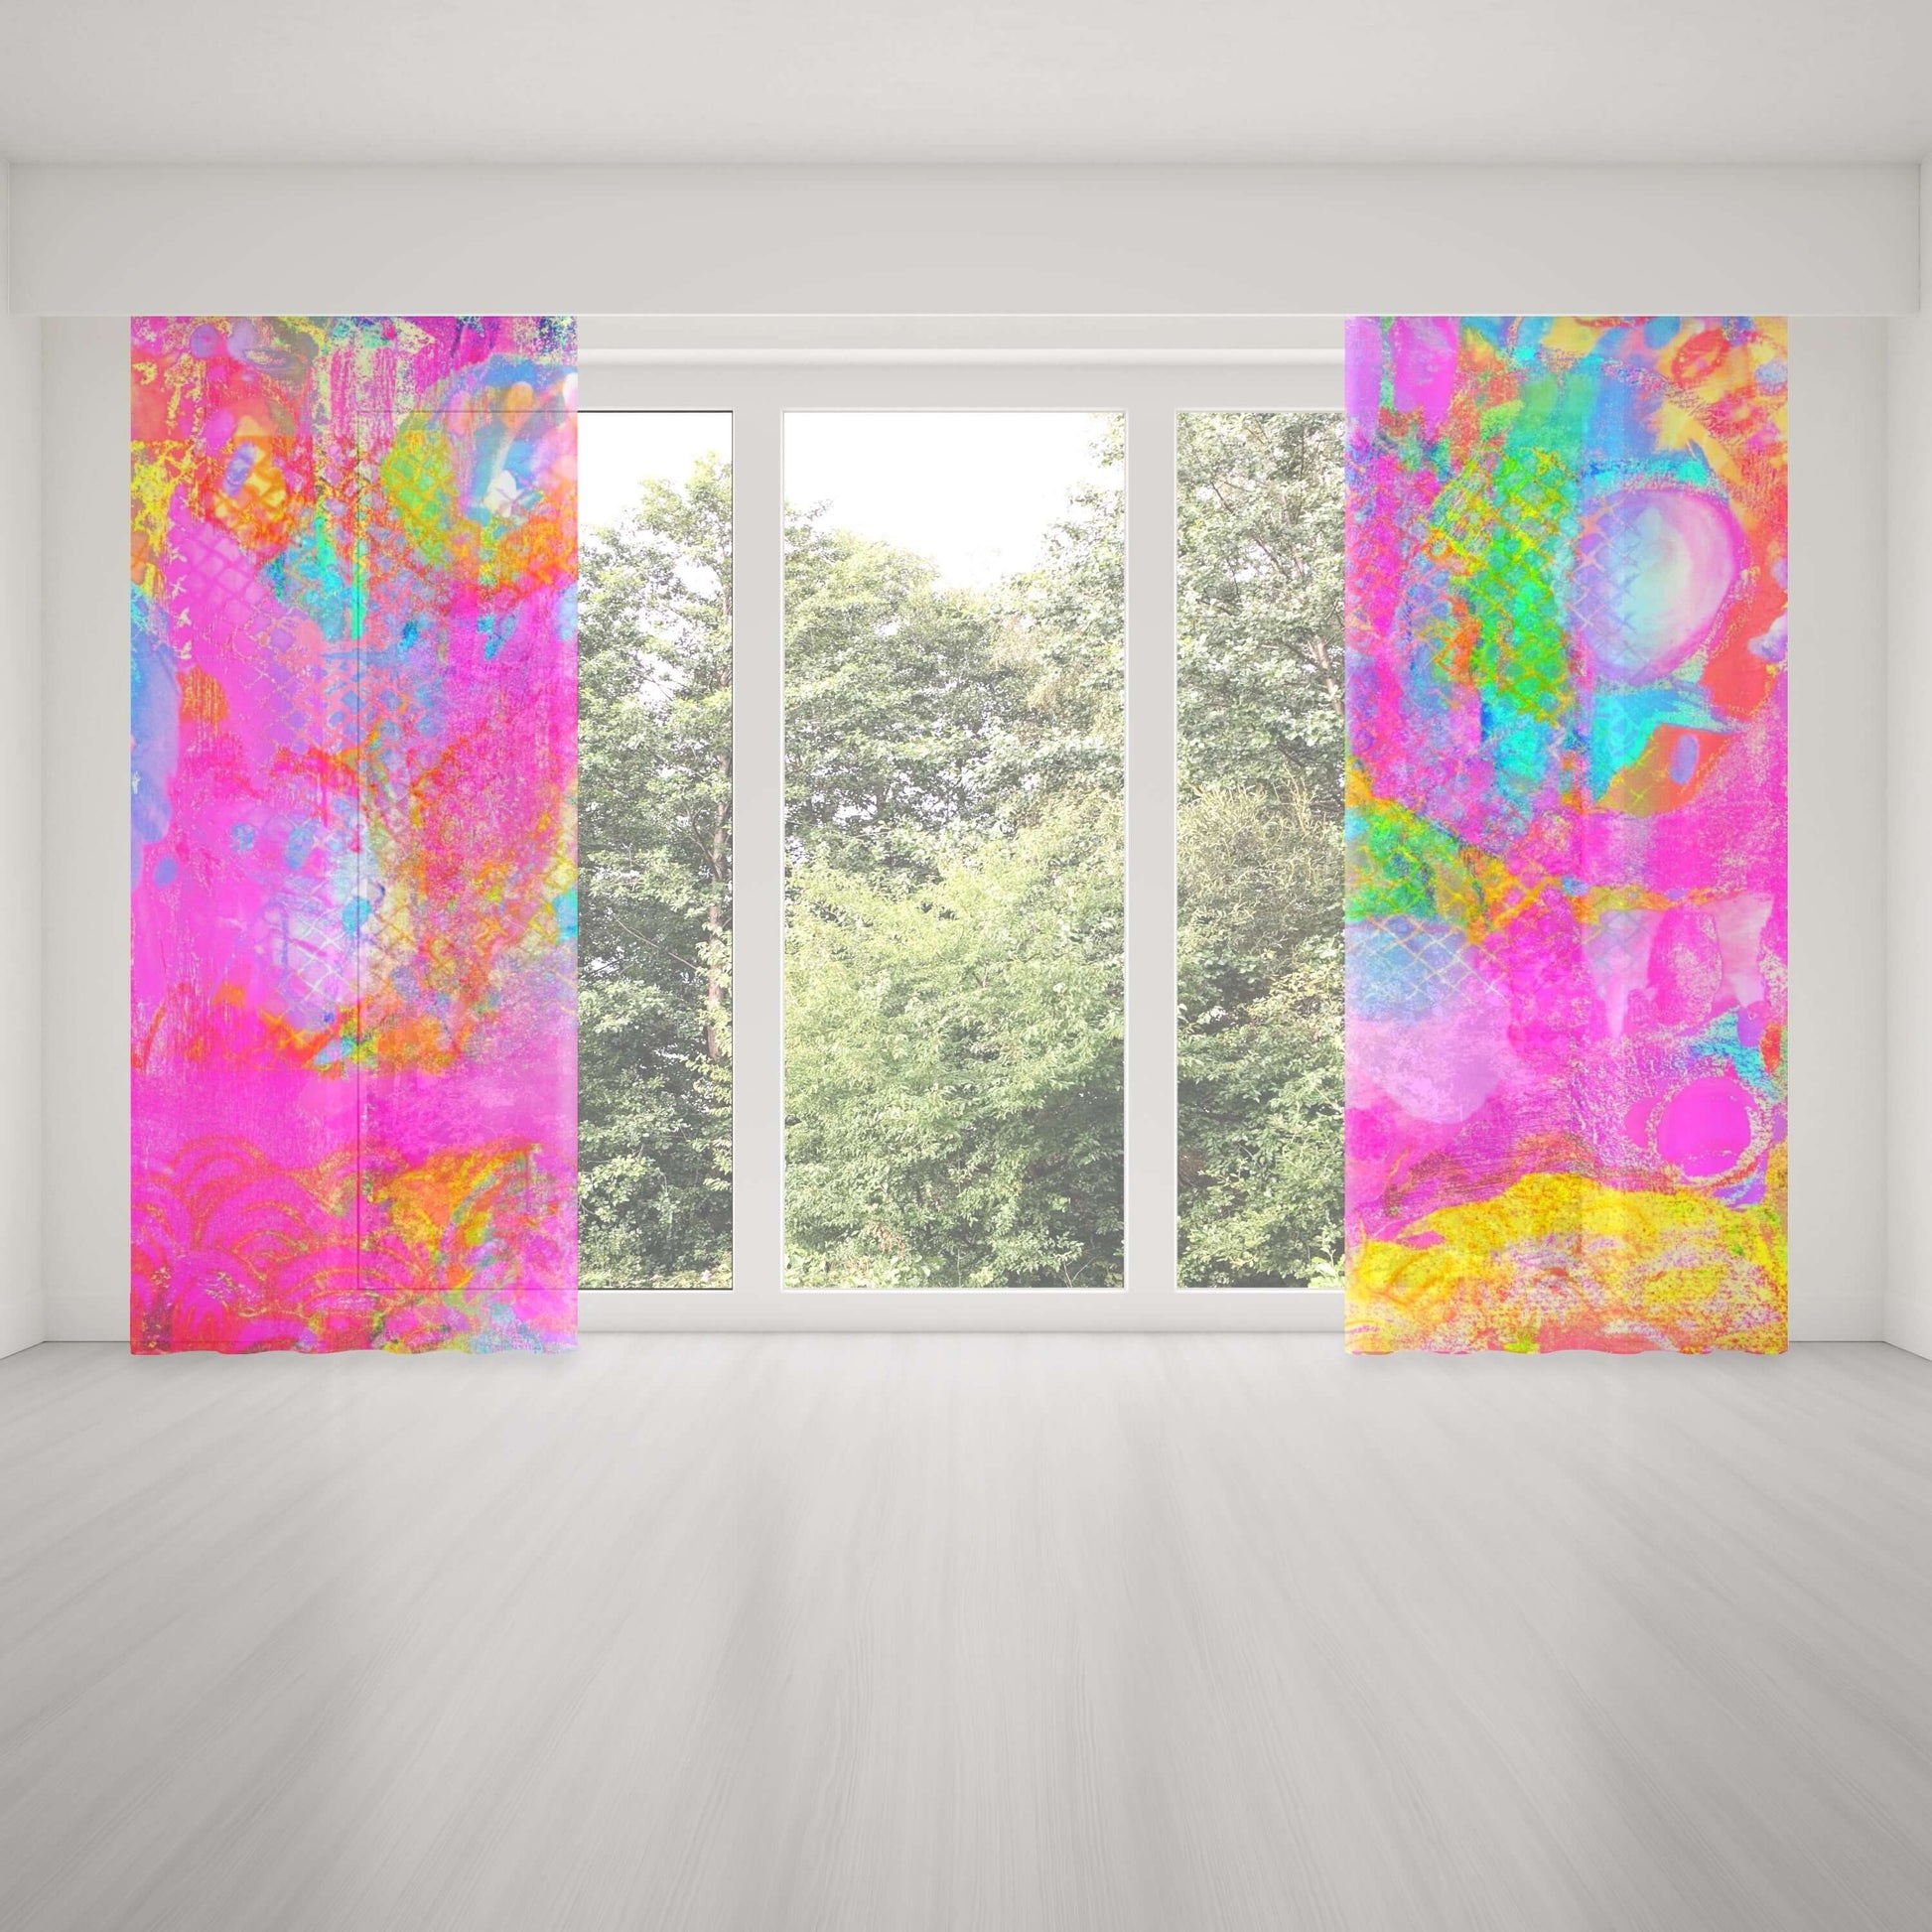 Drippy Pink “Candyland” Abstract Art Colorful Window Curtains